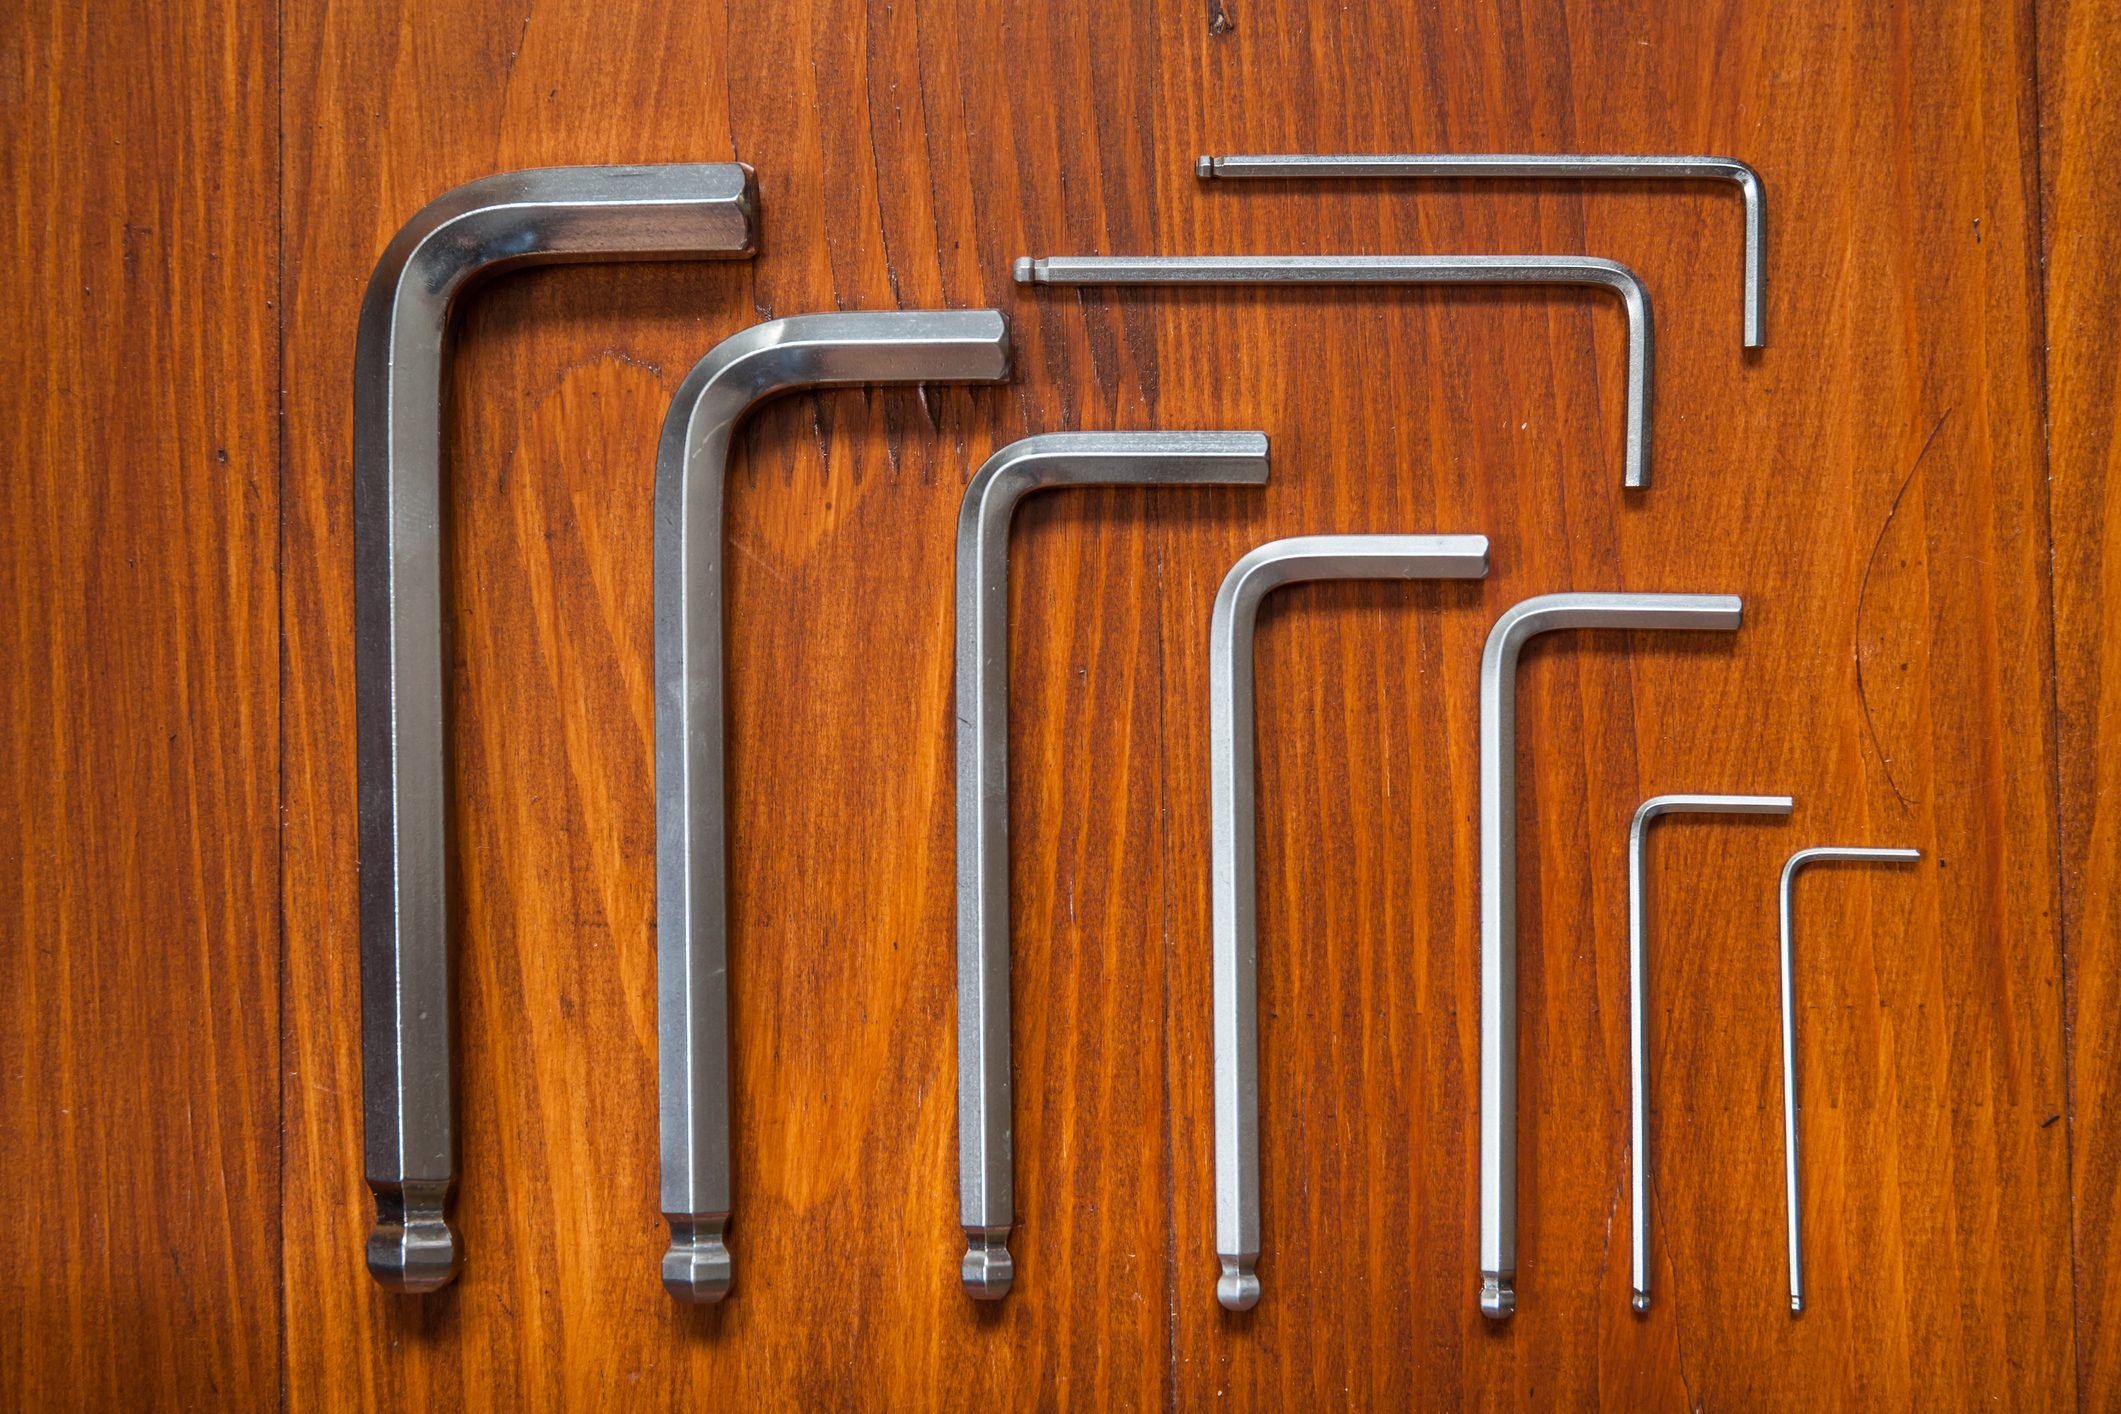 How to Use an Allen Wrench